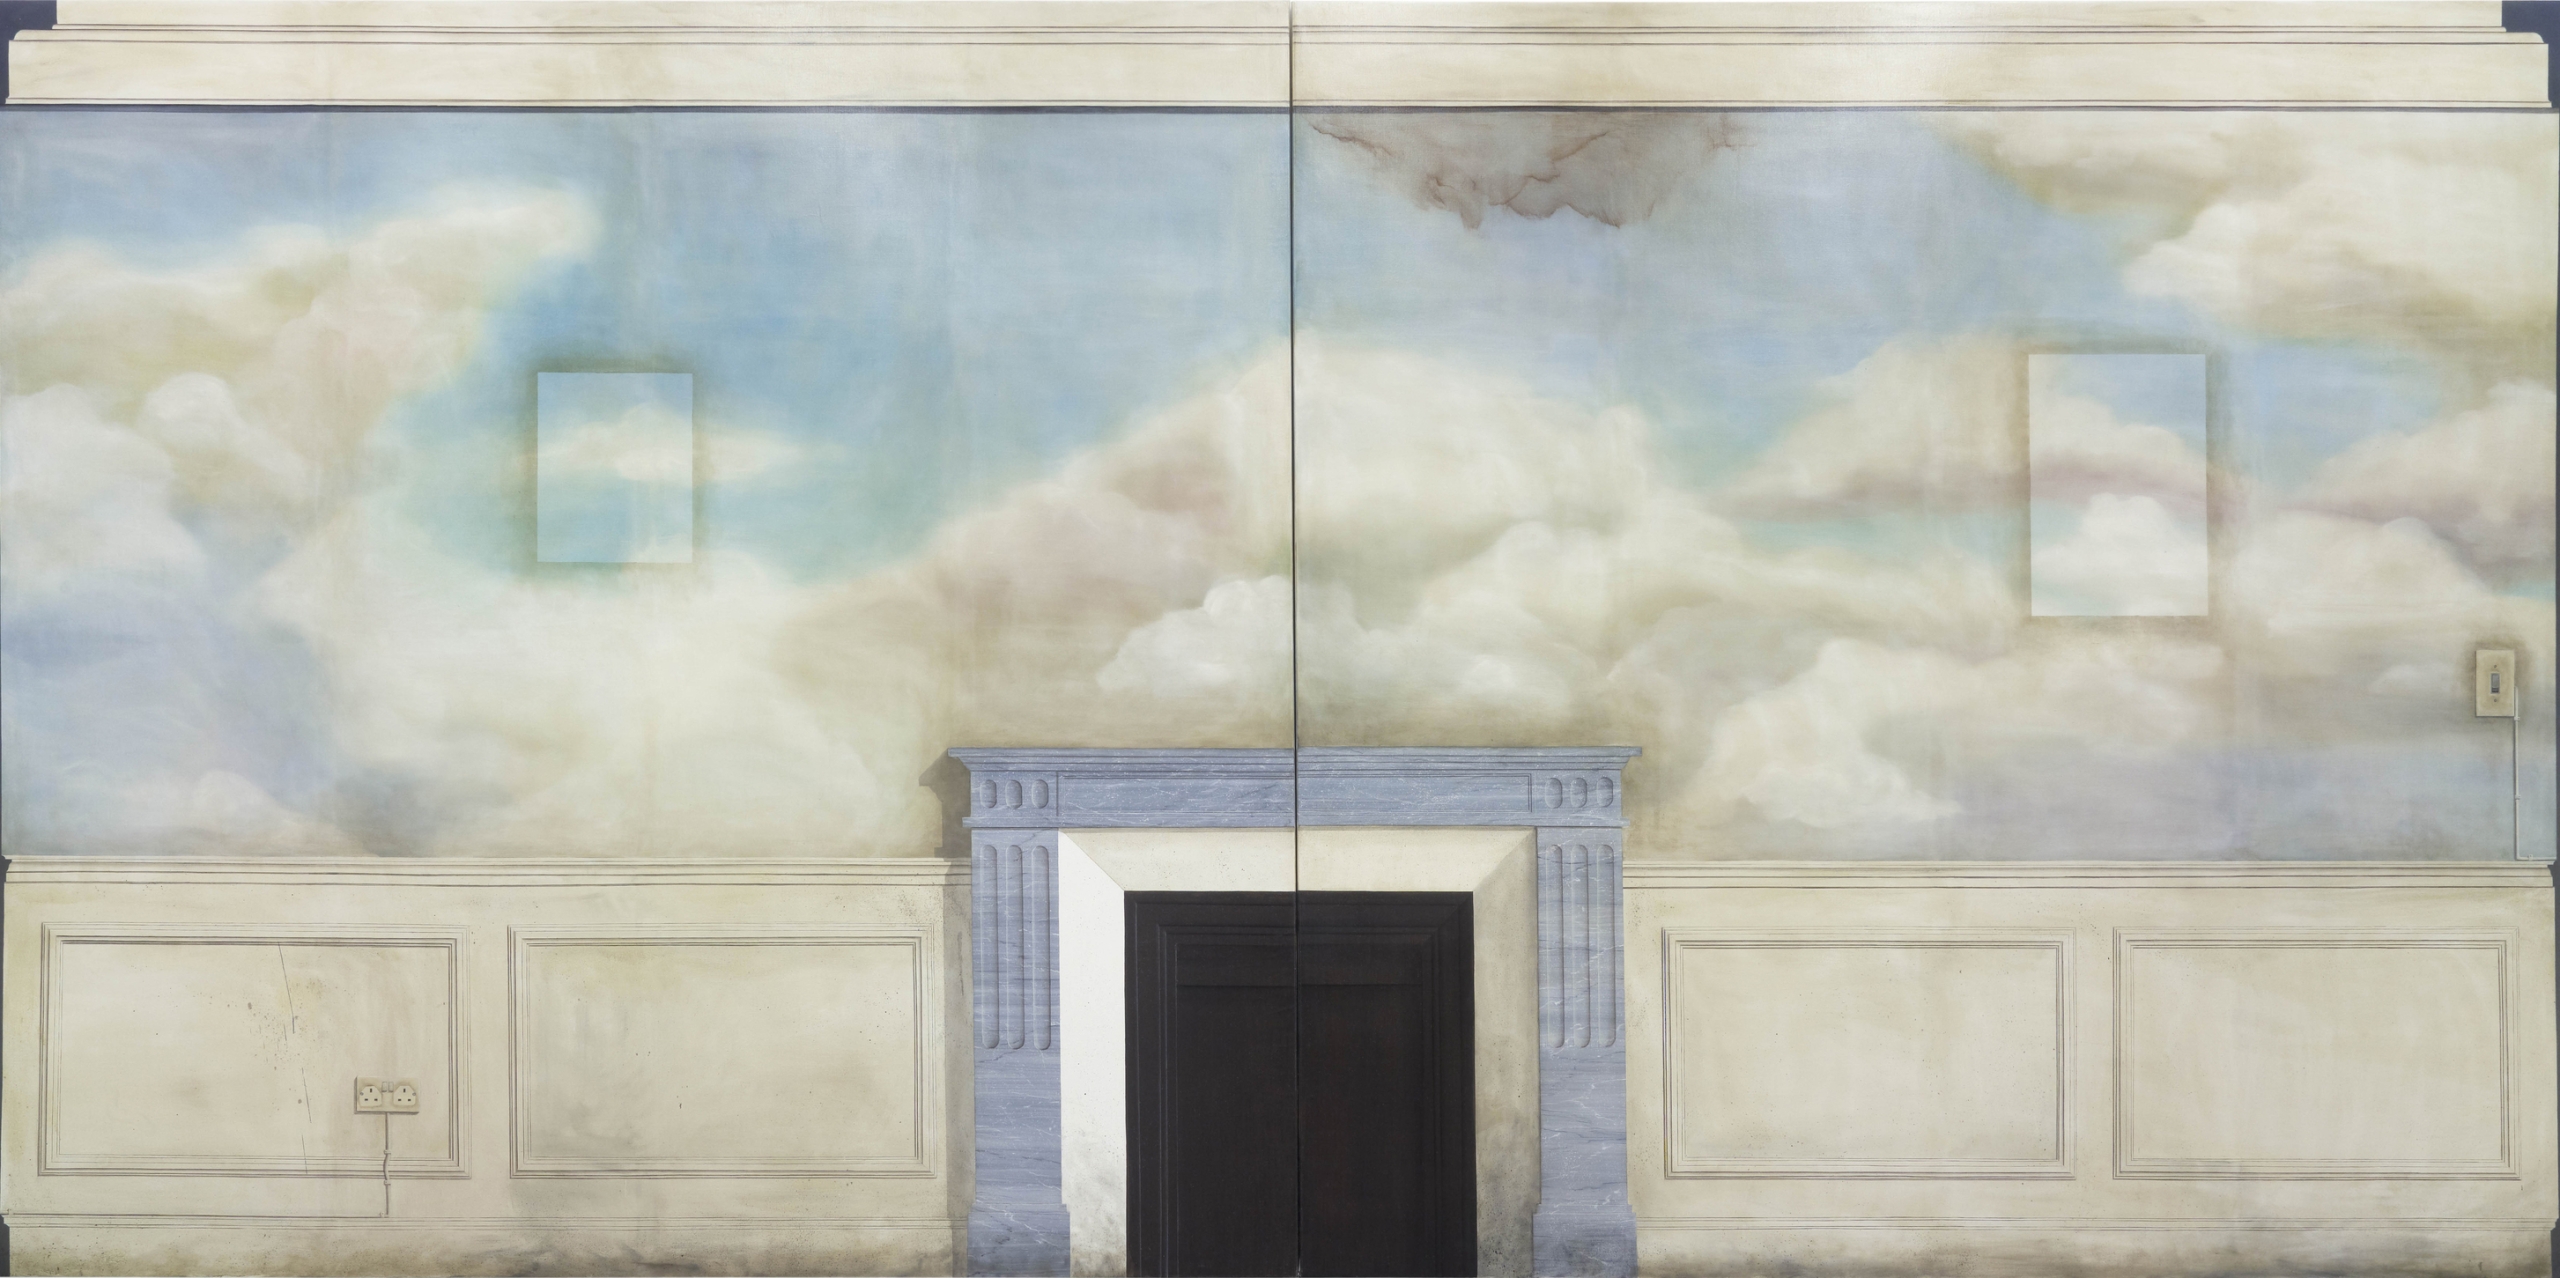 image by lucy mckenzie for tate liverpool feature on luxy mckenzie, featuring a wall with a fireplace and blue and white sky painted on it with clouds